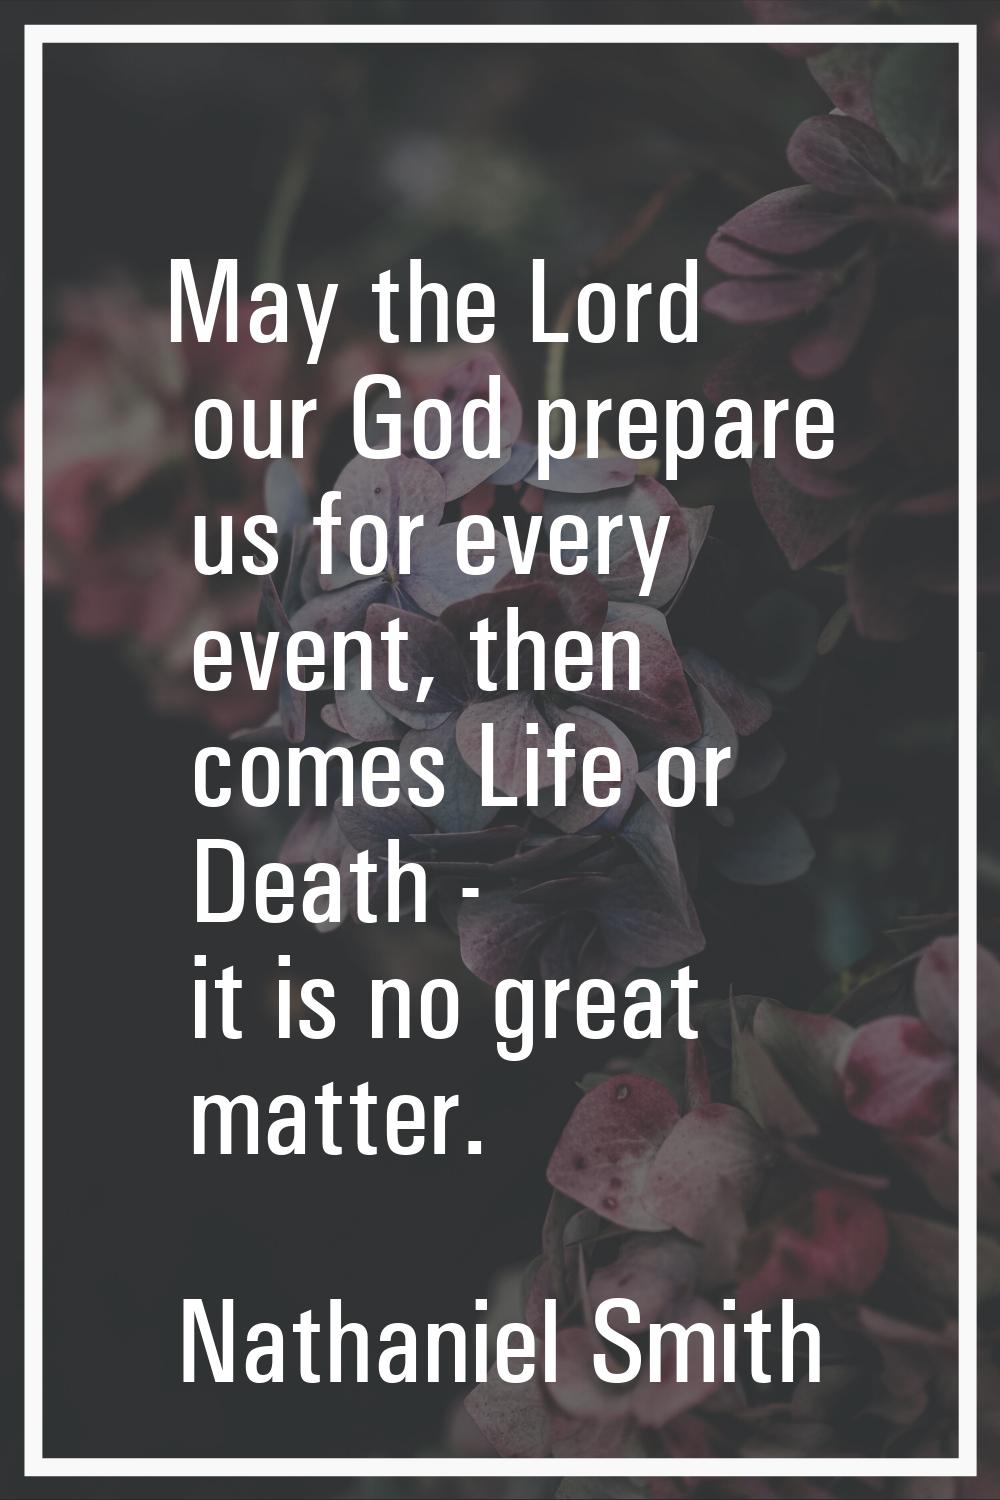 May the Lord our God prepare us for every event, then comes Life or Death - it is no great matter.